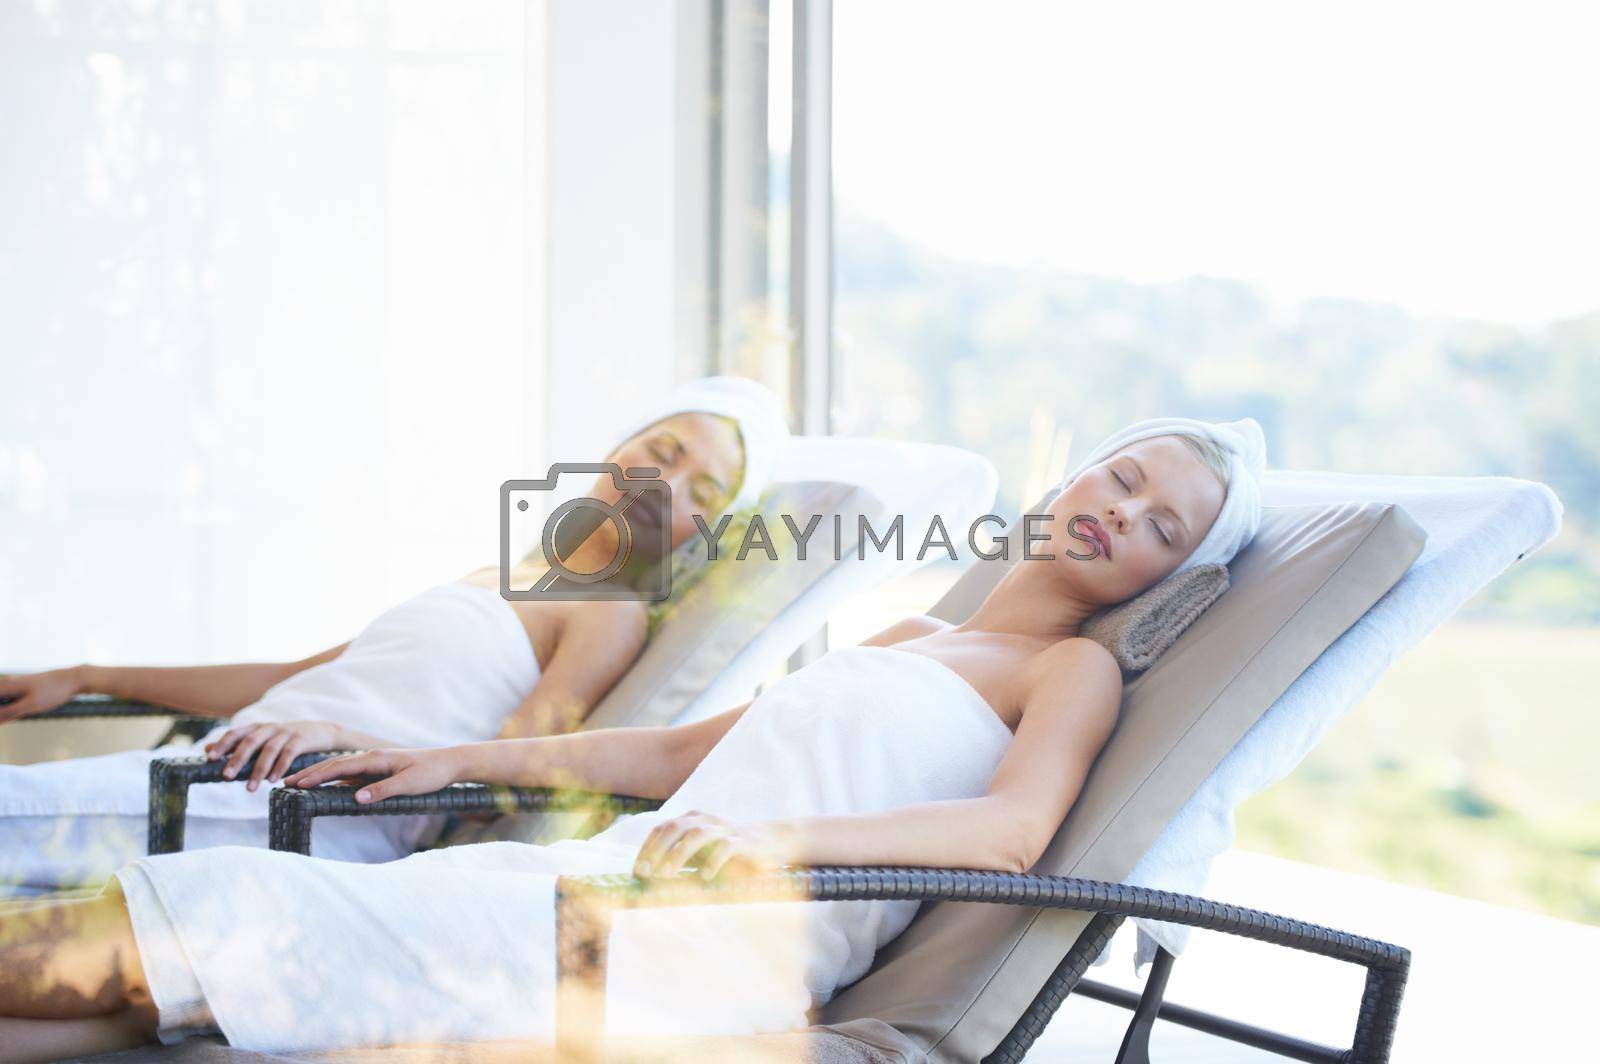 Taking time off for themselves. Two gorgeous young women at the day spa together